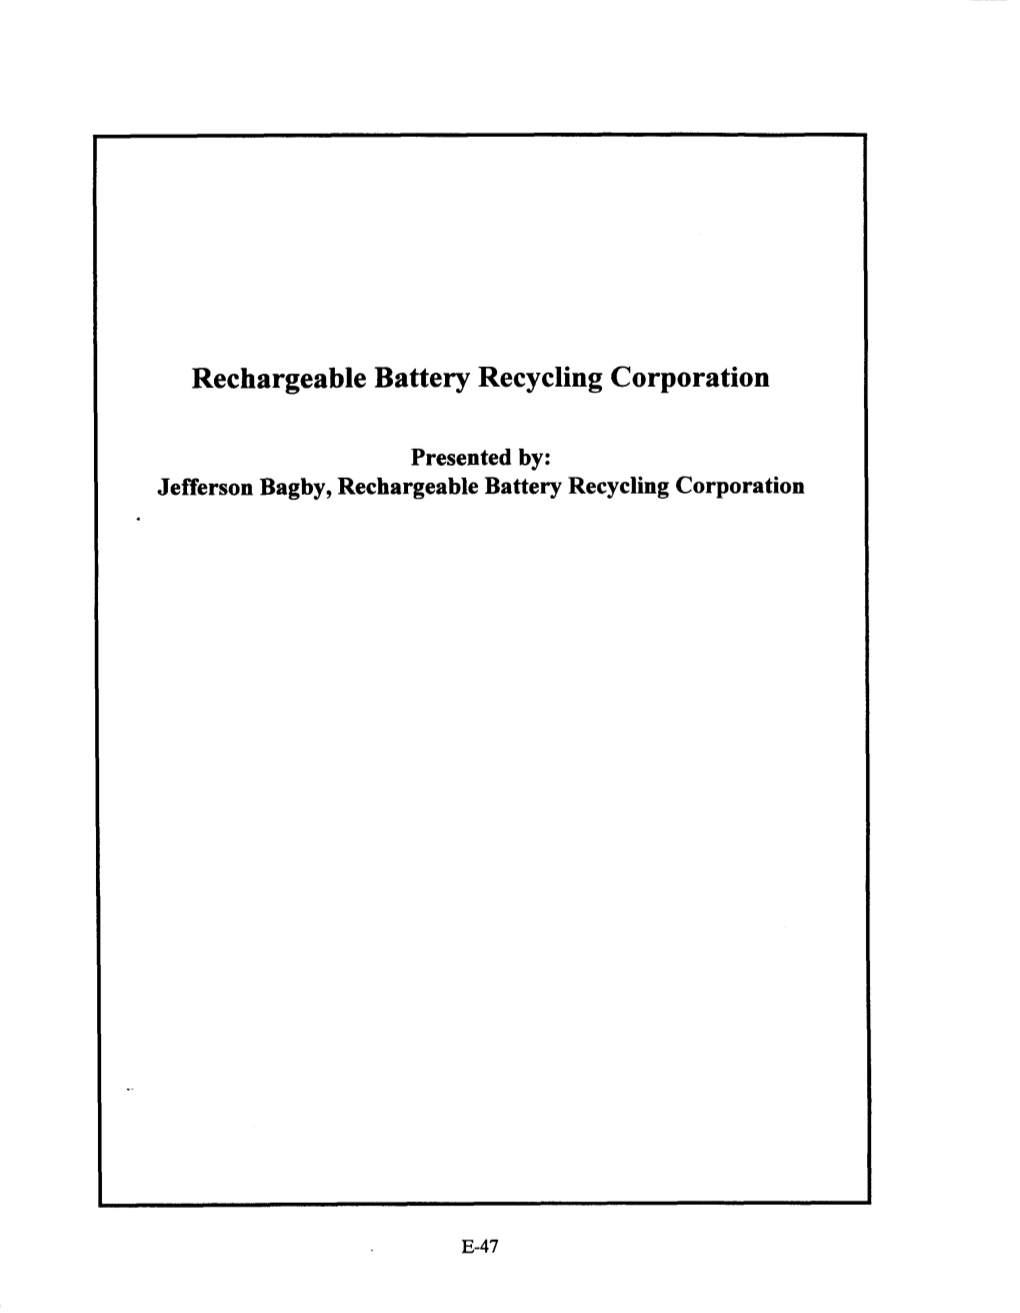 Rechargeable Battery Recycling Corporation’S (RBRC) “Charge up to Recycle!” Program for Used Nickel-Cadmium (Ni-Cd) Batteries